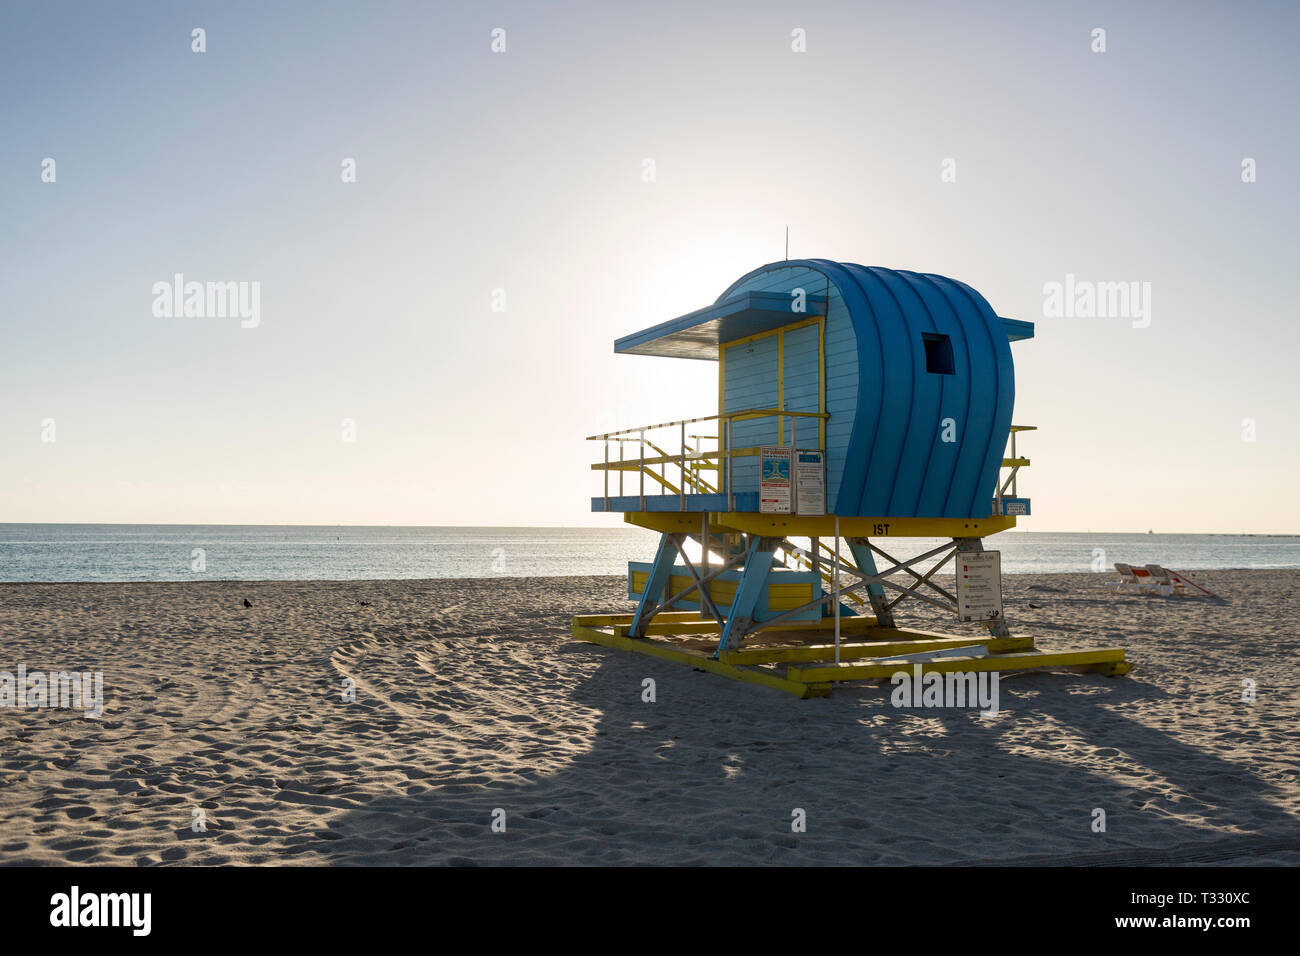 The colorful and iconic lifeguard tower at first street on Miami Beach, Florida, USA Stock Photo